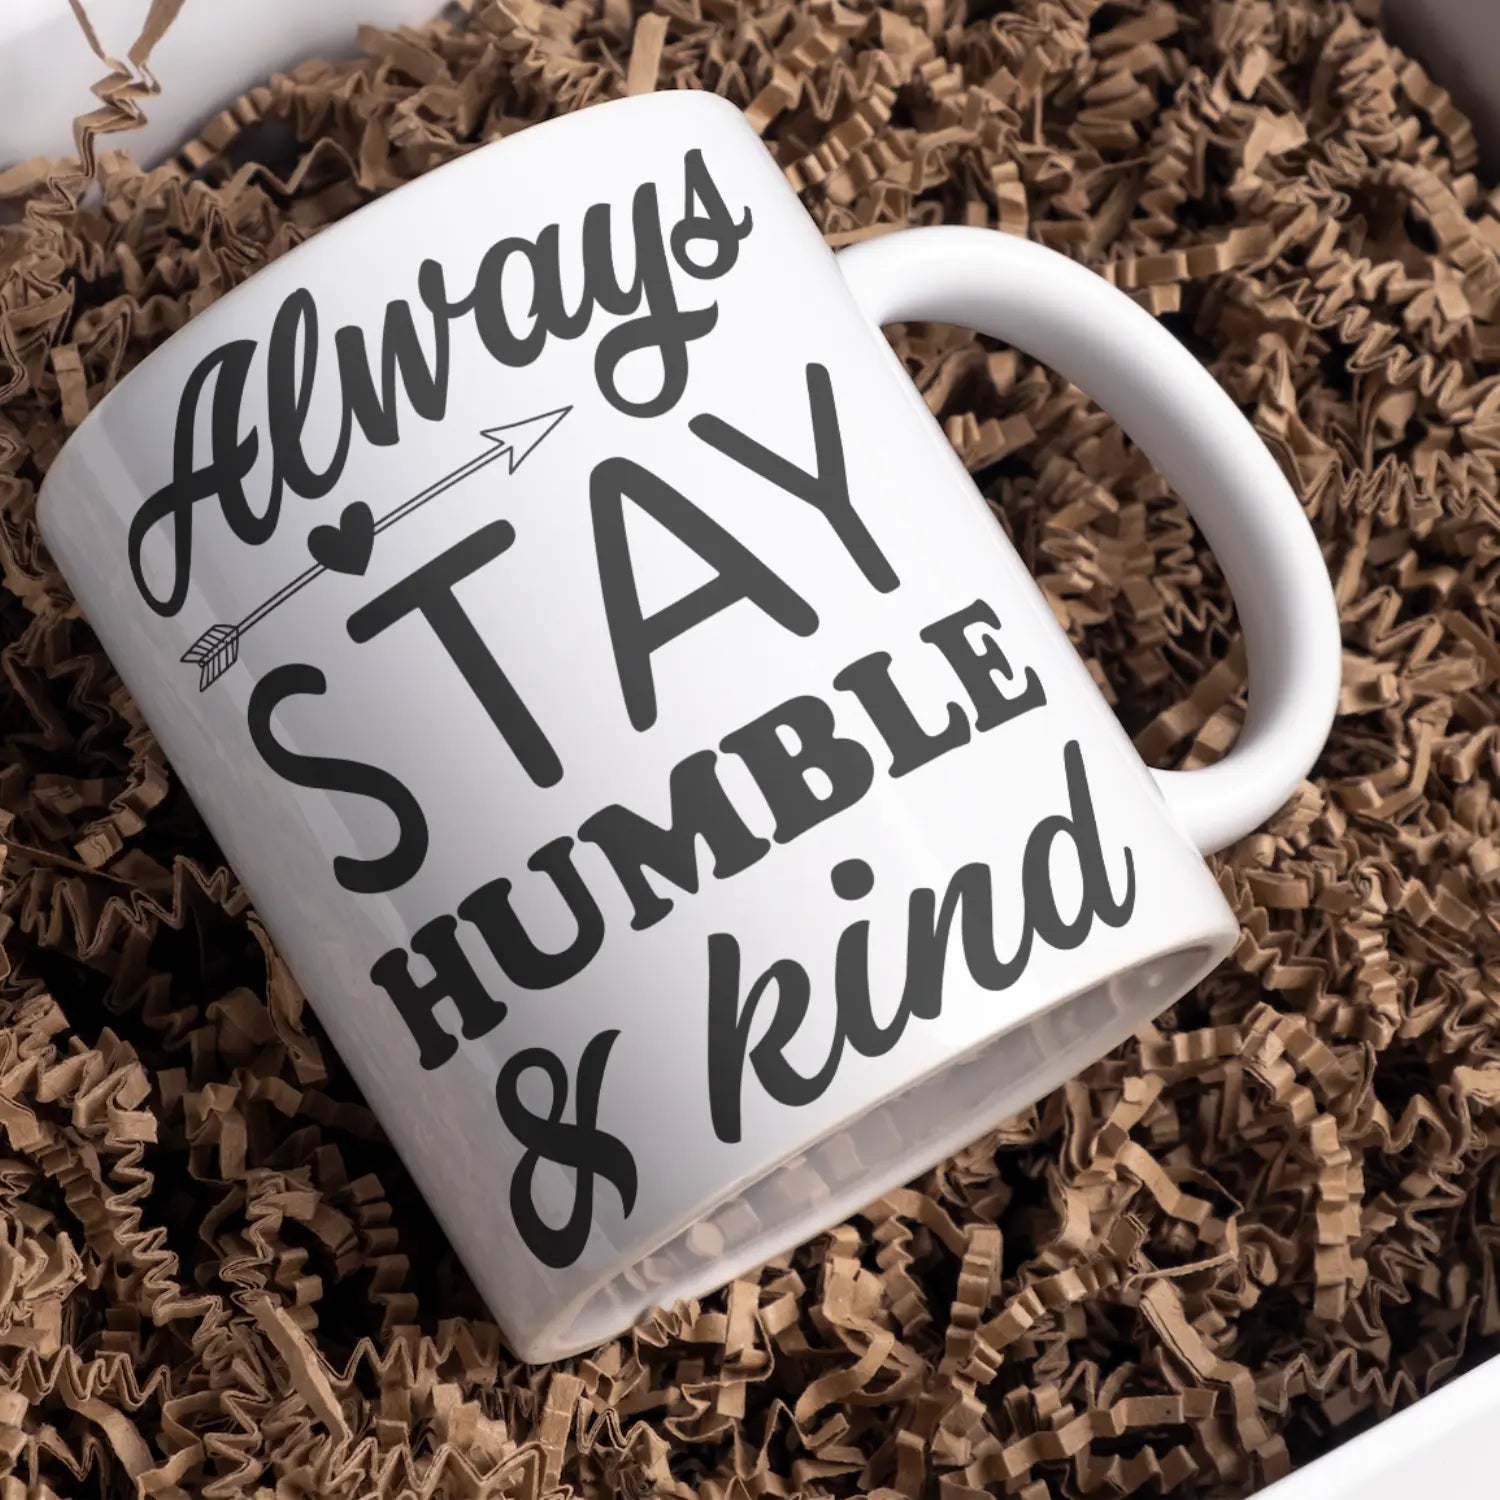 Always stay humble and kind SVG | Digital Download | Cut File | SVG Only The Sweet Stuff